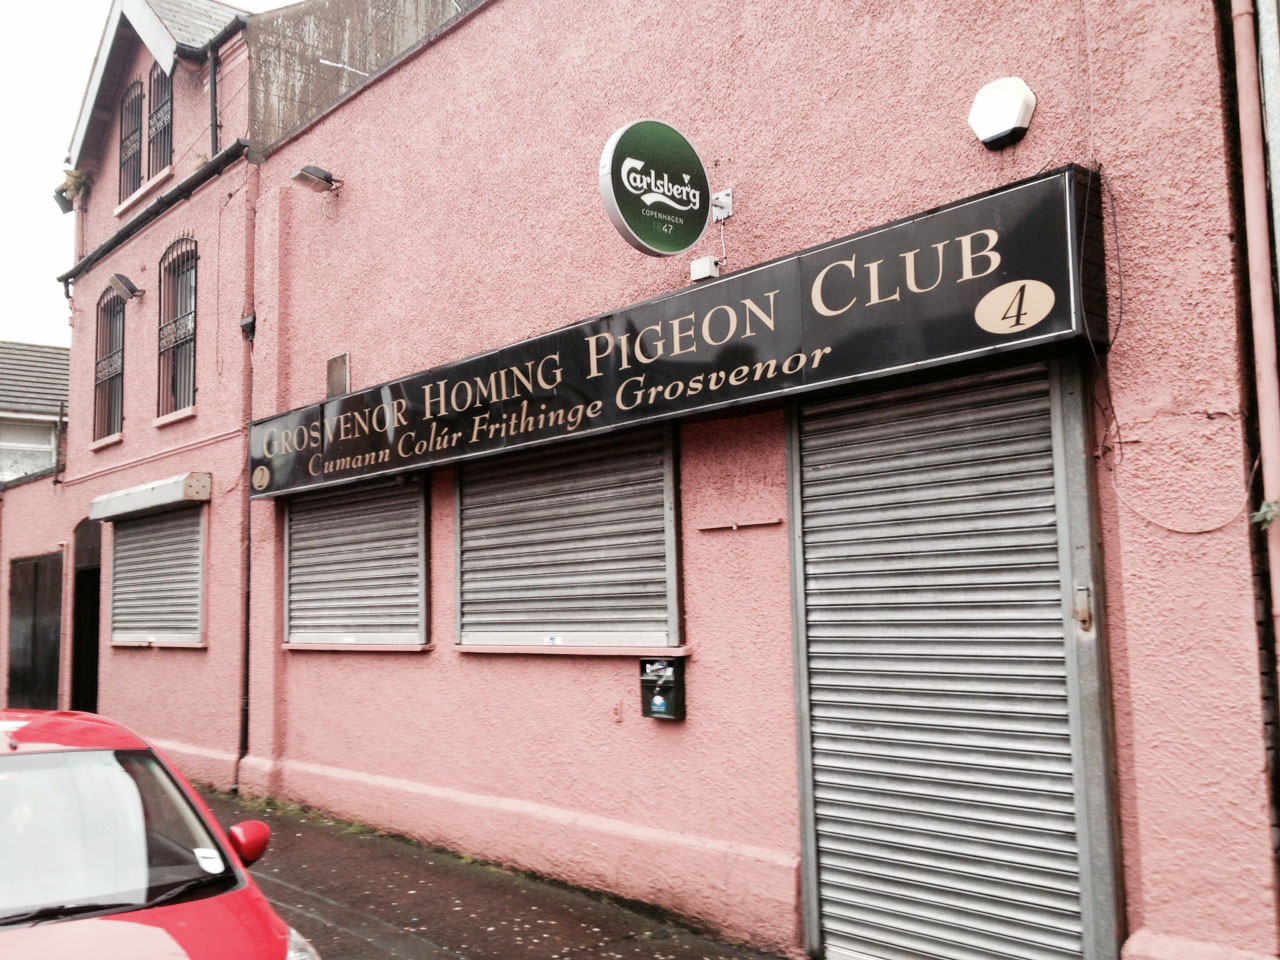  The Grosvenor Homing Pigeon Society clubrooms in Iveagh Street, where two men were shot yesterday afternoon